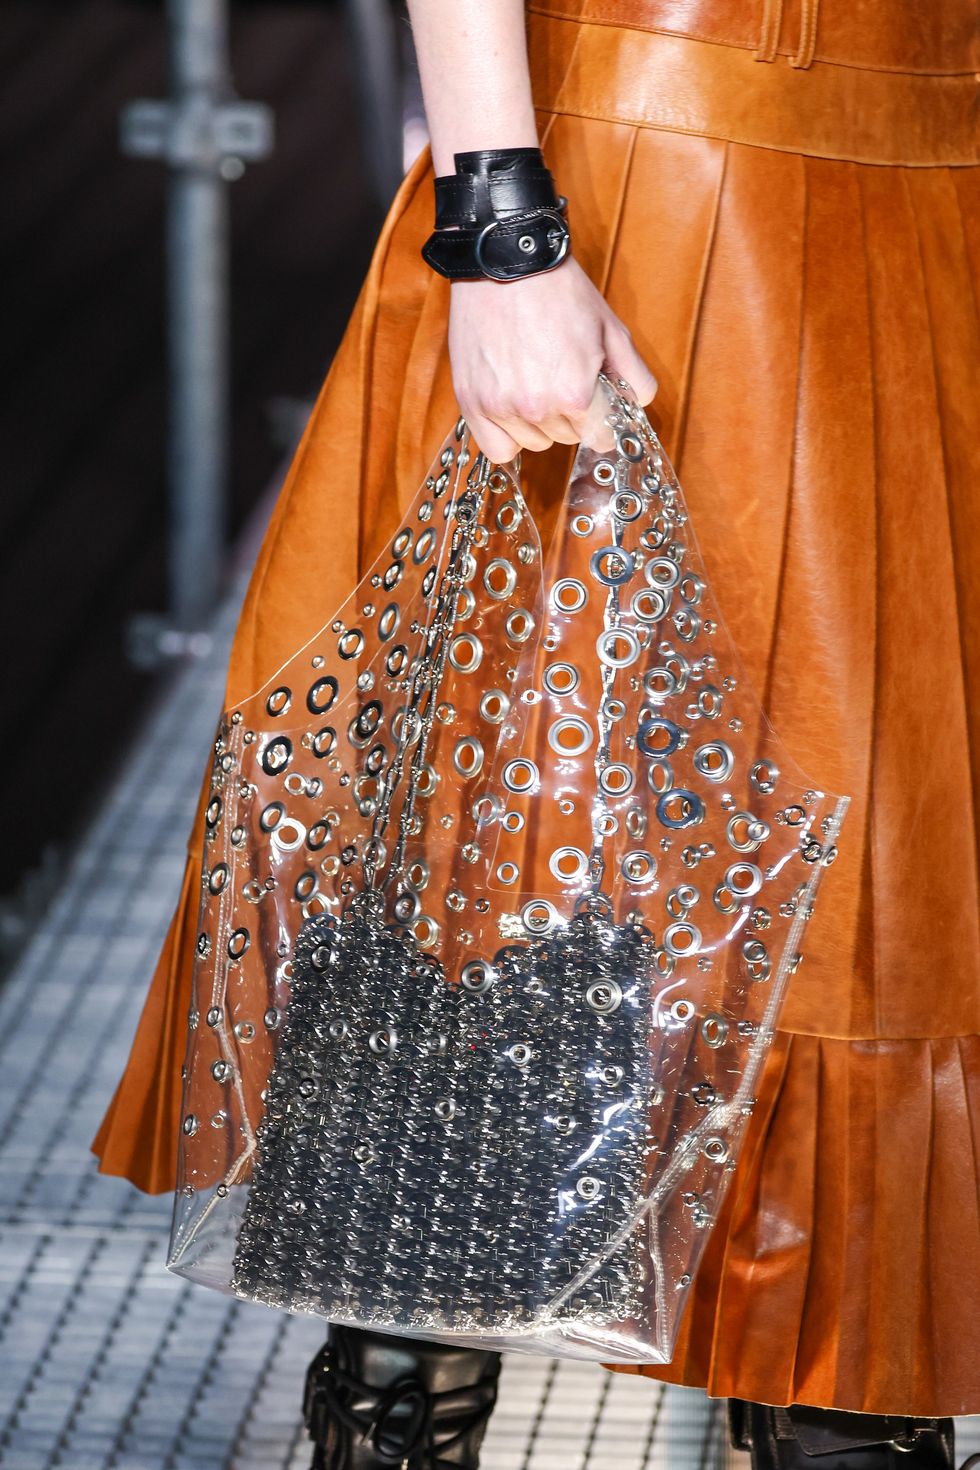 The Spring/Summer 2023 Handbag Trends to Know and Shop Now